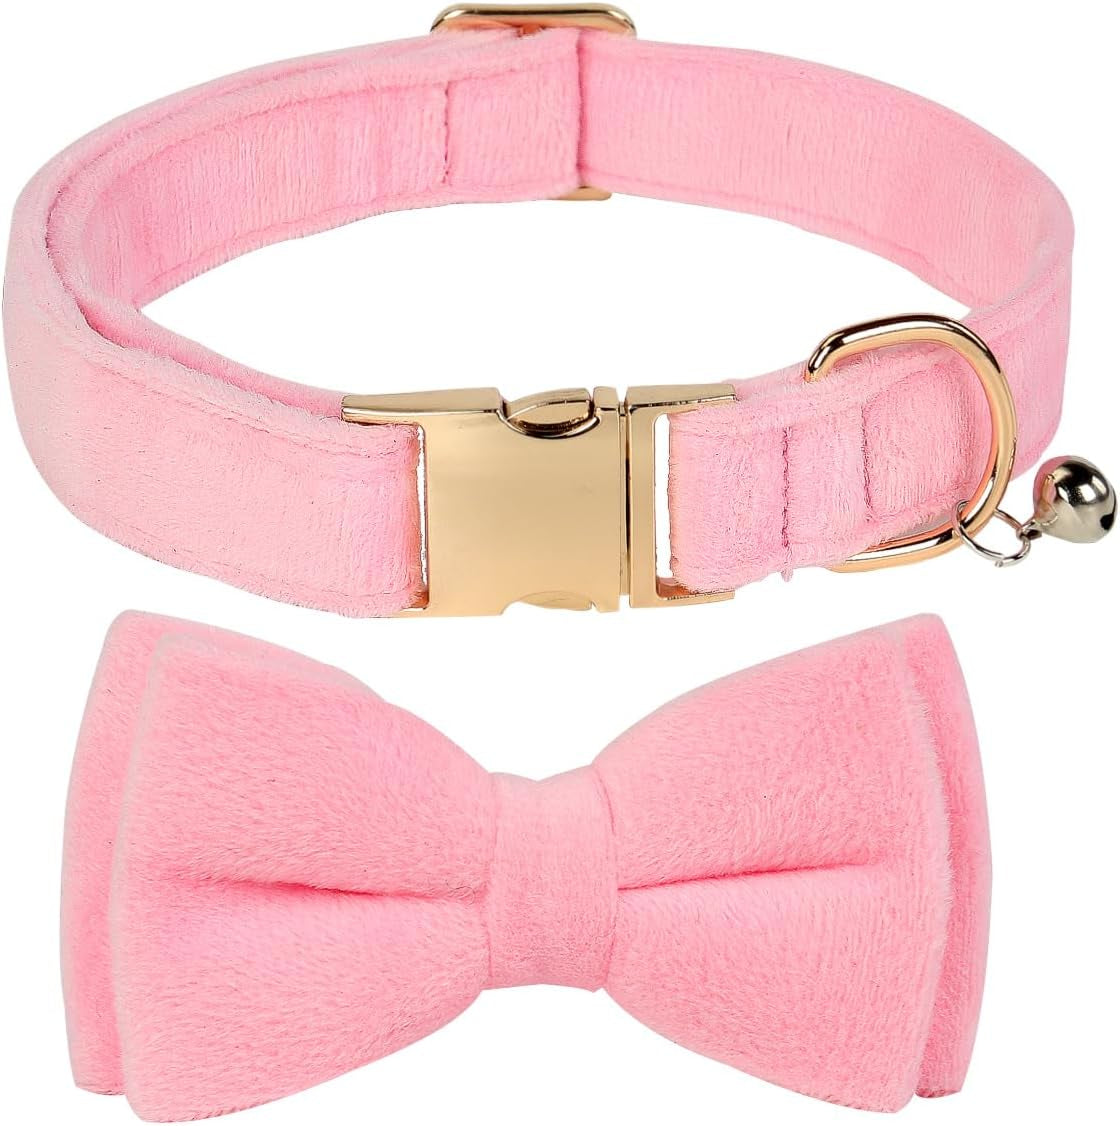 Dog Bowtie Collars, Cute Soft Velvet Dog Collar with Bow Tie, Safety Metal Buckle, Adjustable Collars for Boy and Girl Dogs Pets.